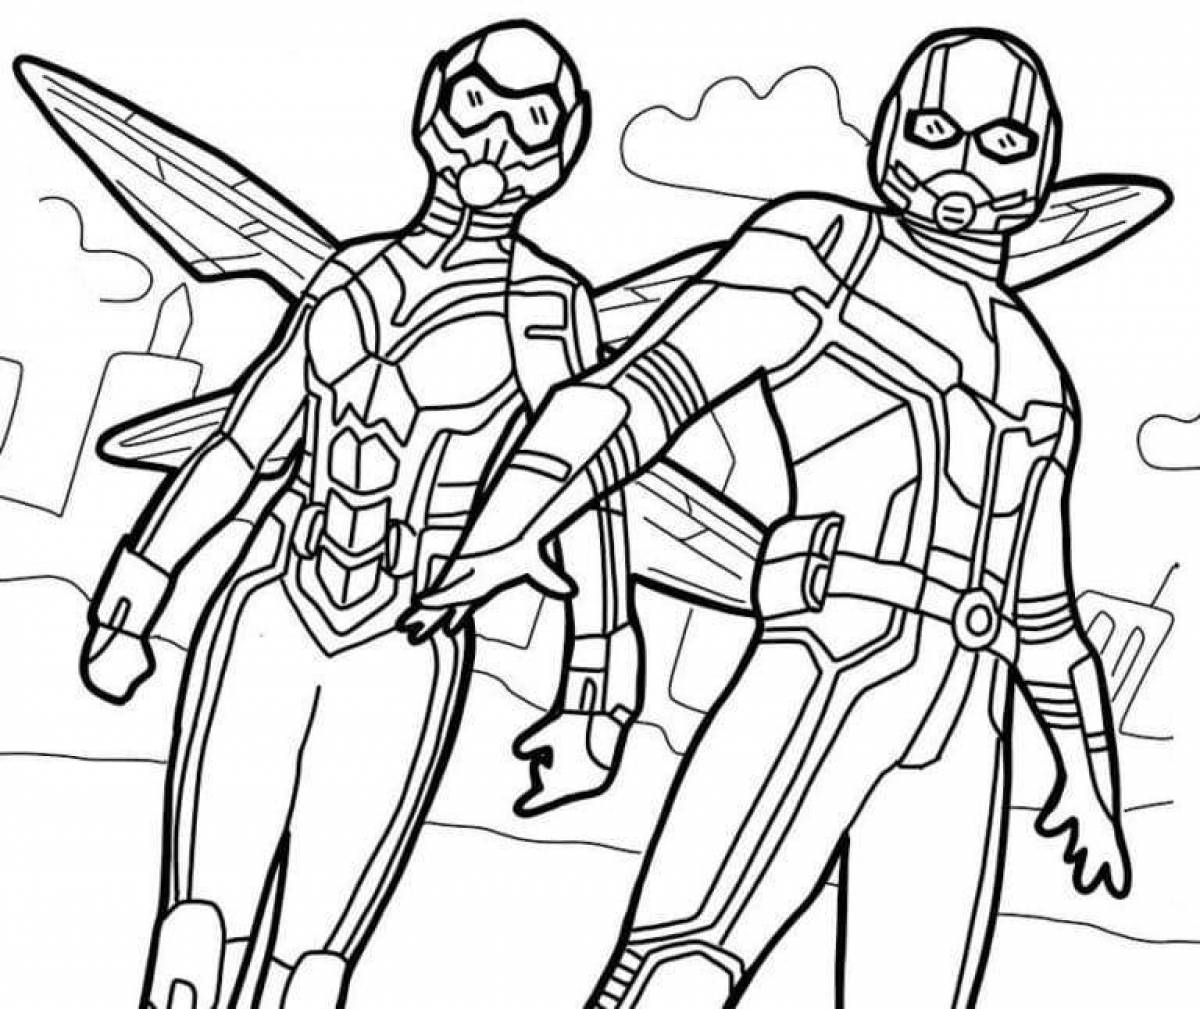 Charming ant-man coloring book